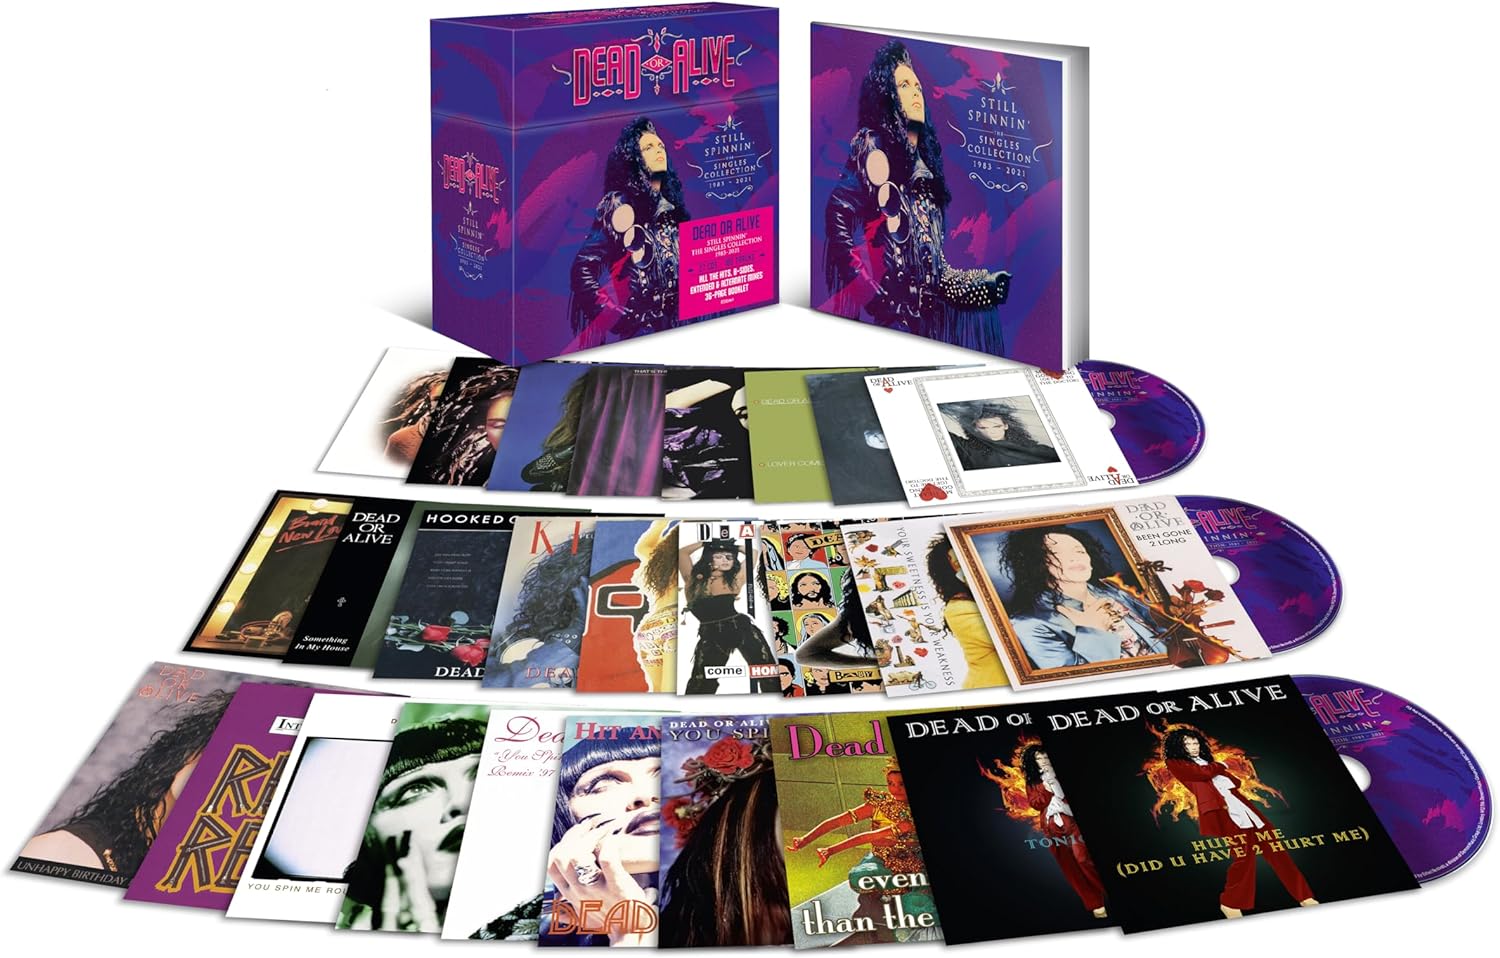 Dead or Alive / New CD singles box set – SuperDeluxeEdition